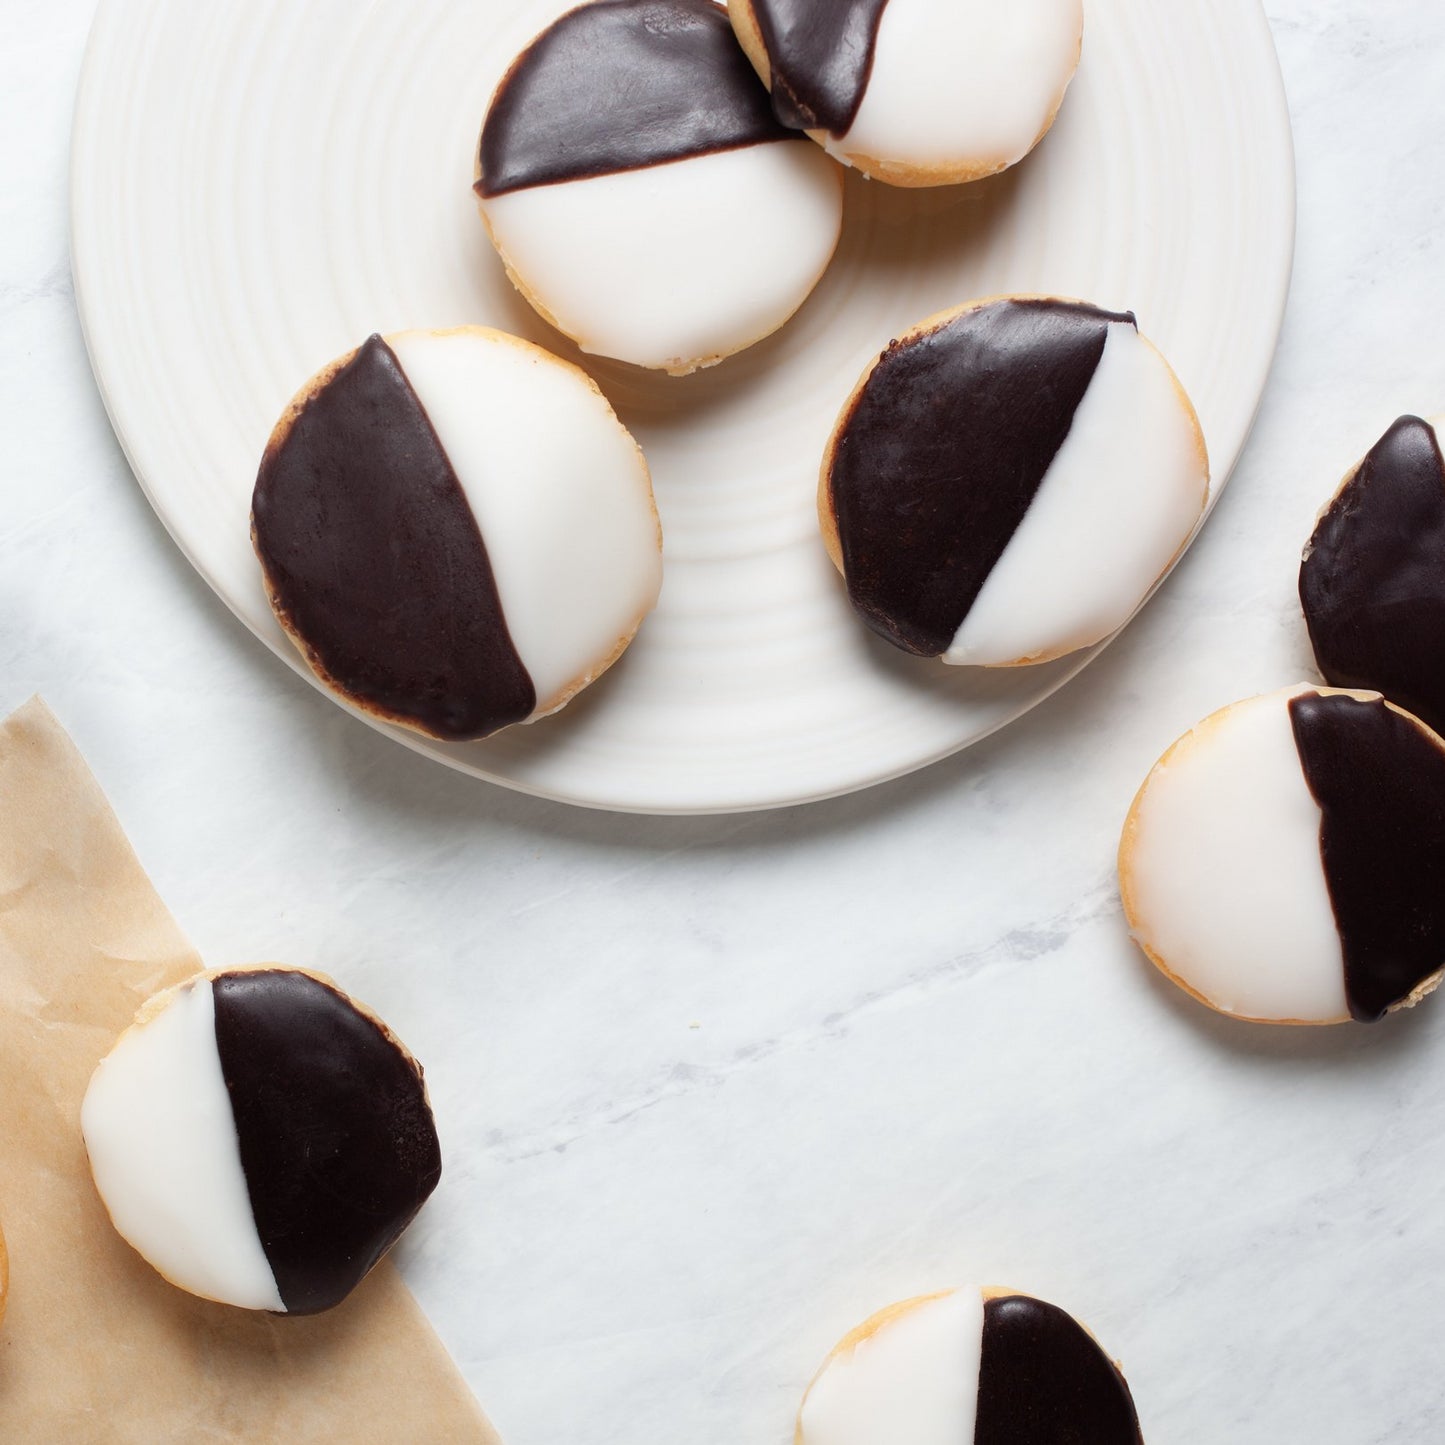 Flourless Black & White Cookies for Passover